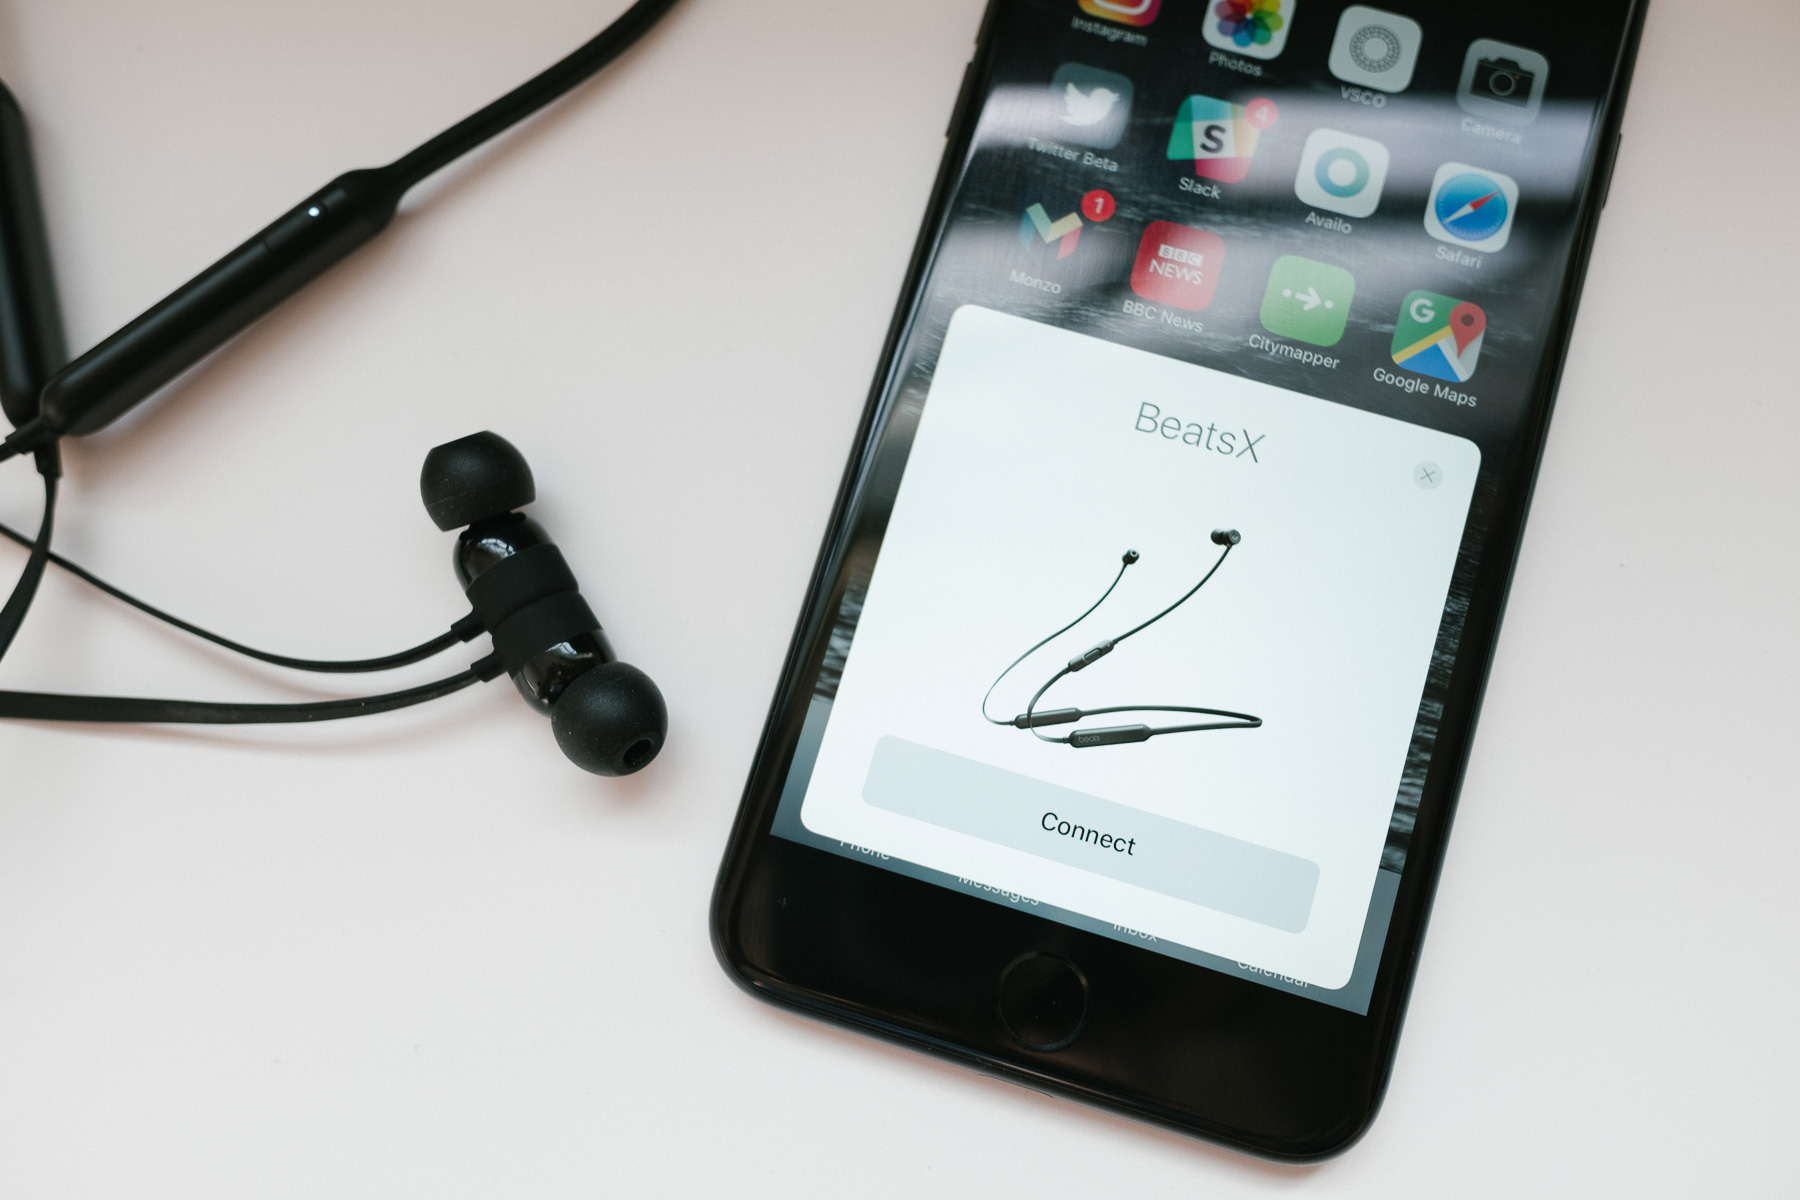 beats x for iphone